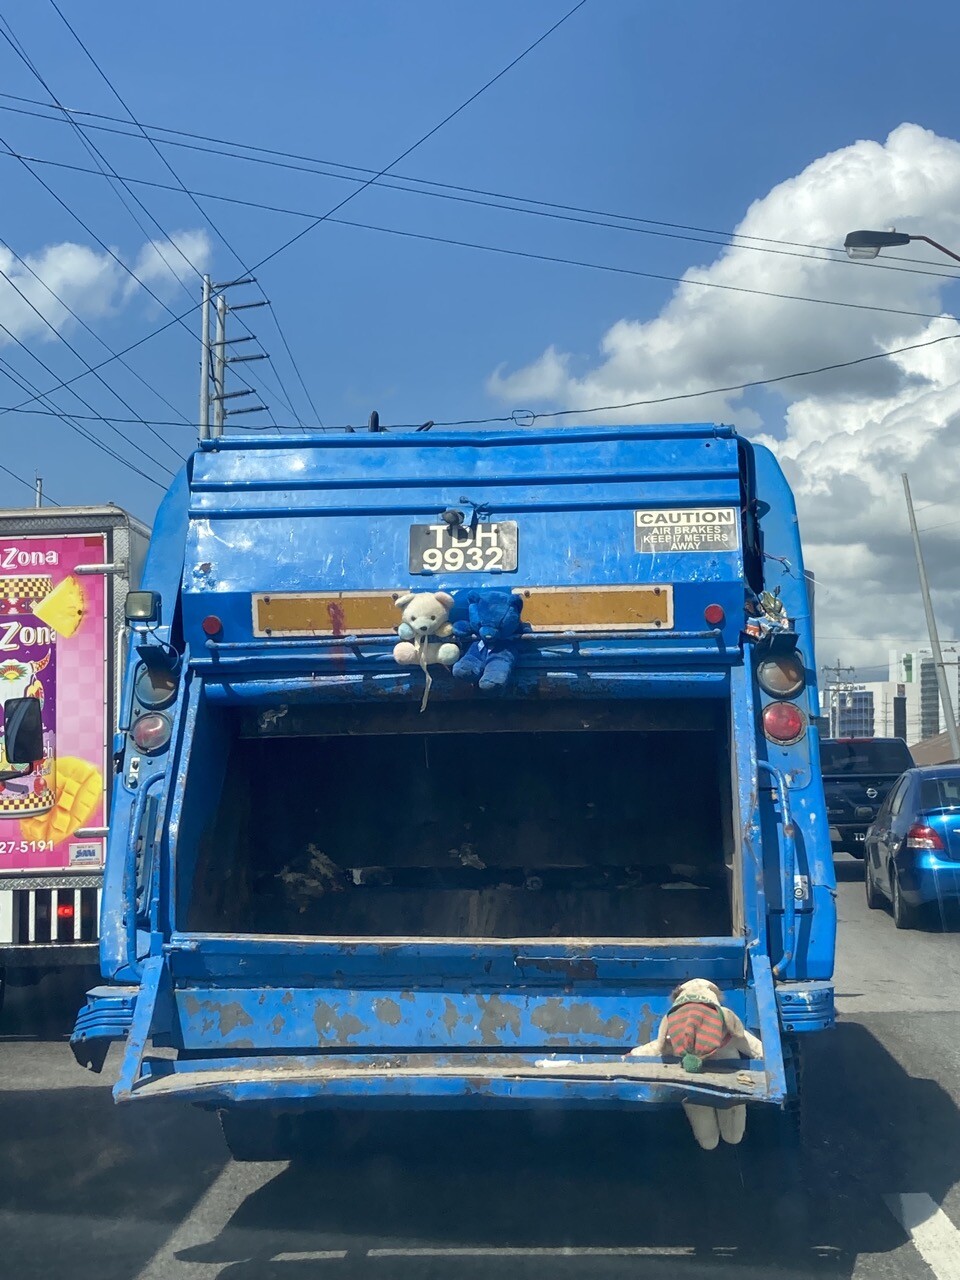 Behind a garbage truck with stuffed toy animals (teddy bears and a turtle)